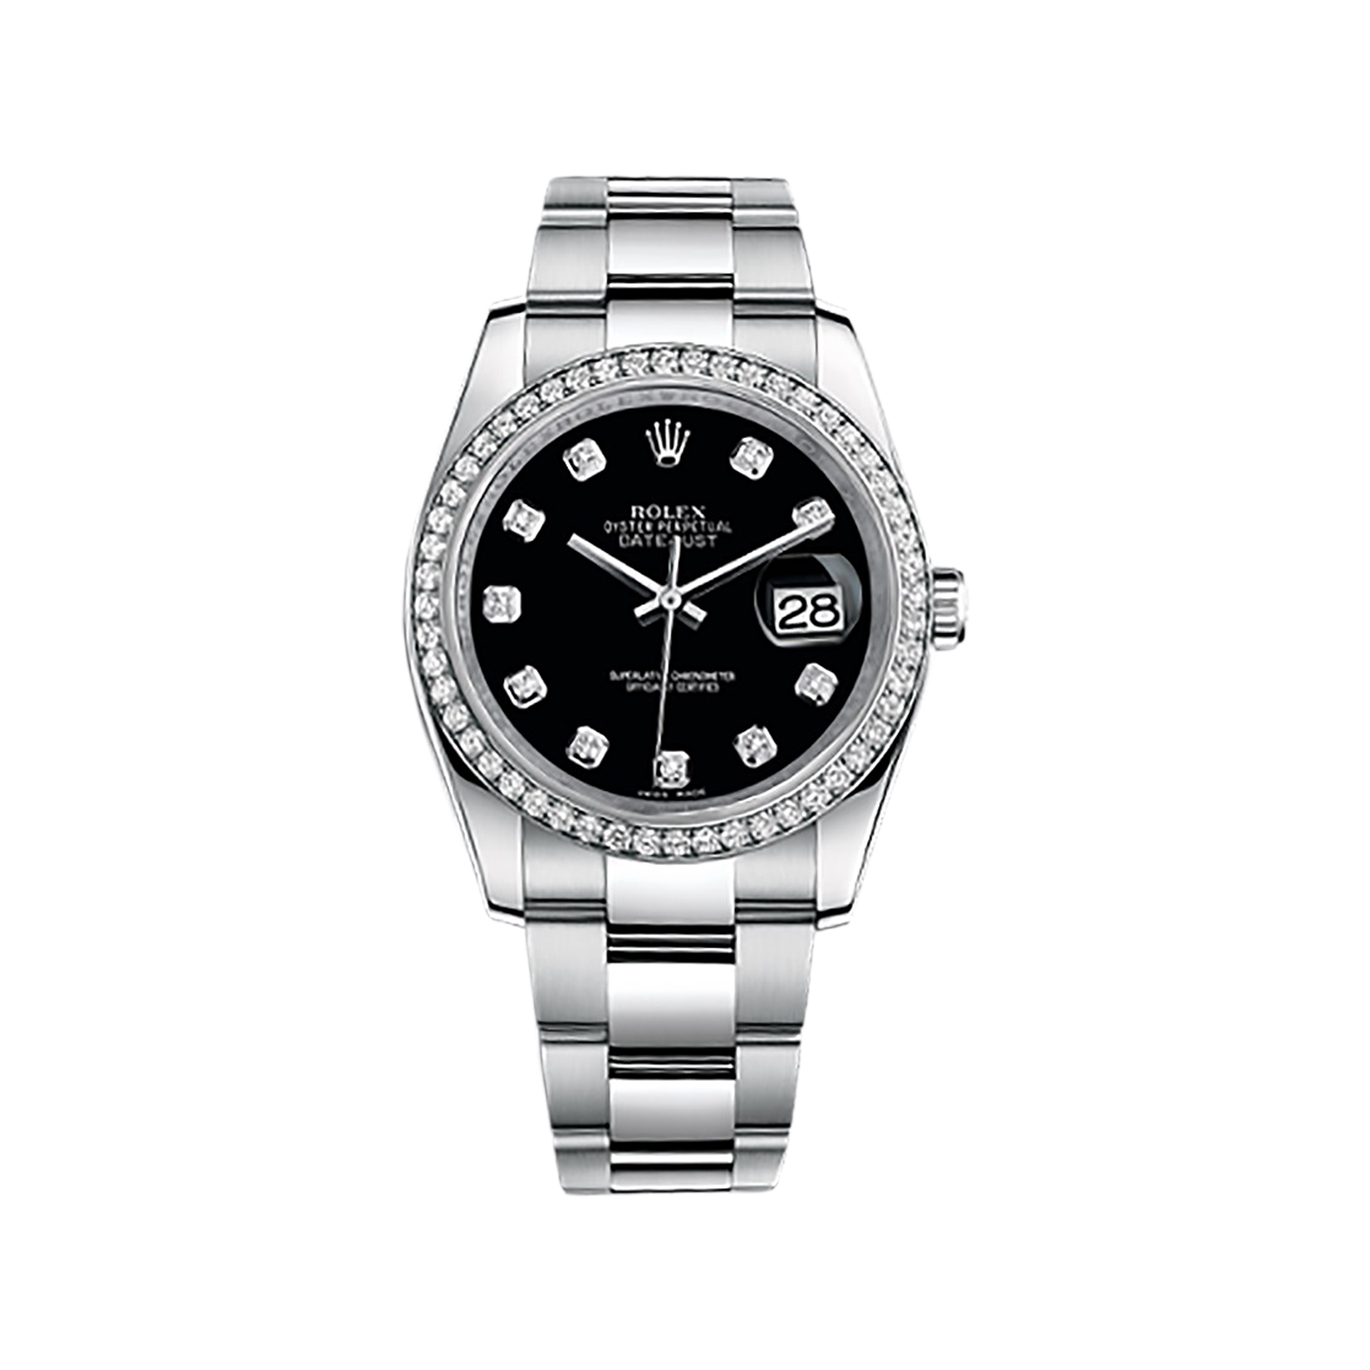 Datejust 36 116244 White Gold & Stainless Steel Watch (Black Set with Diamonds) - Click Image to Close